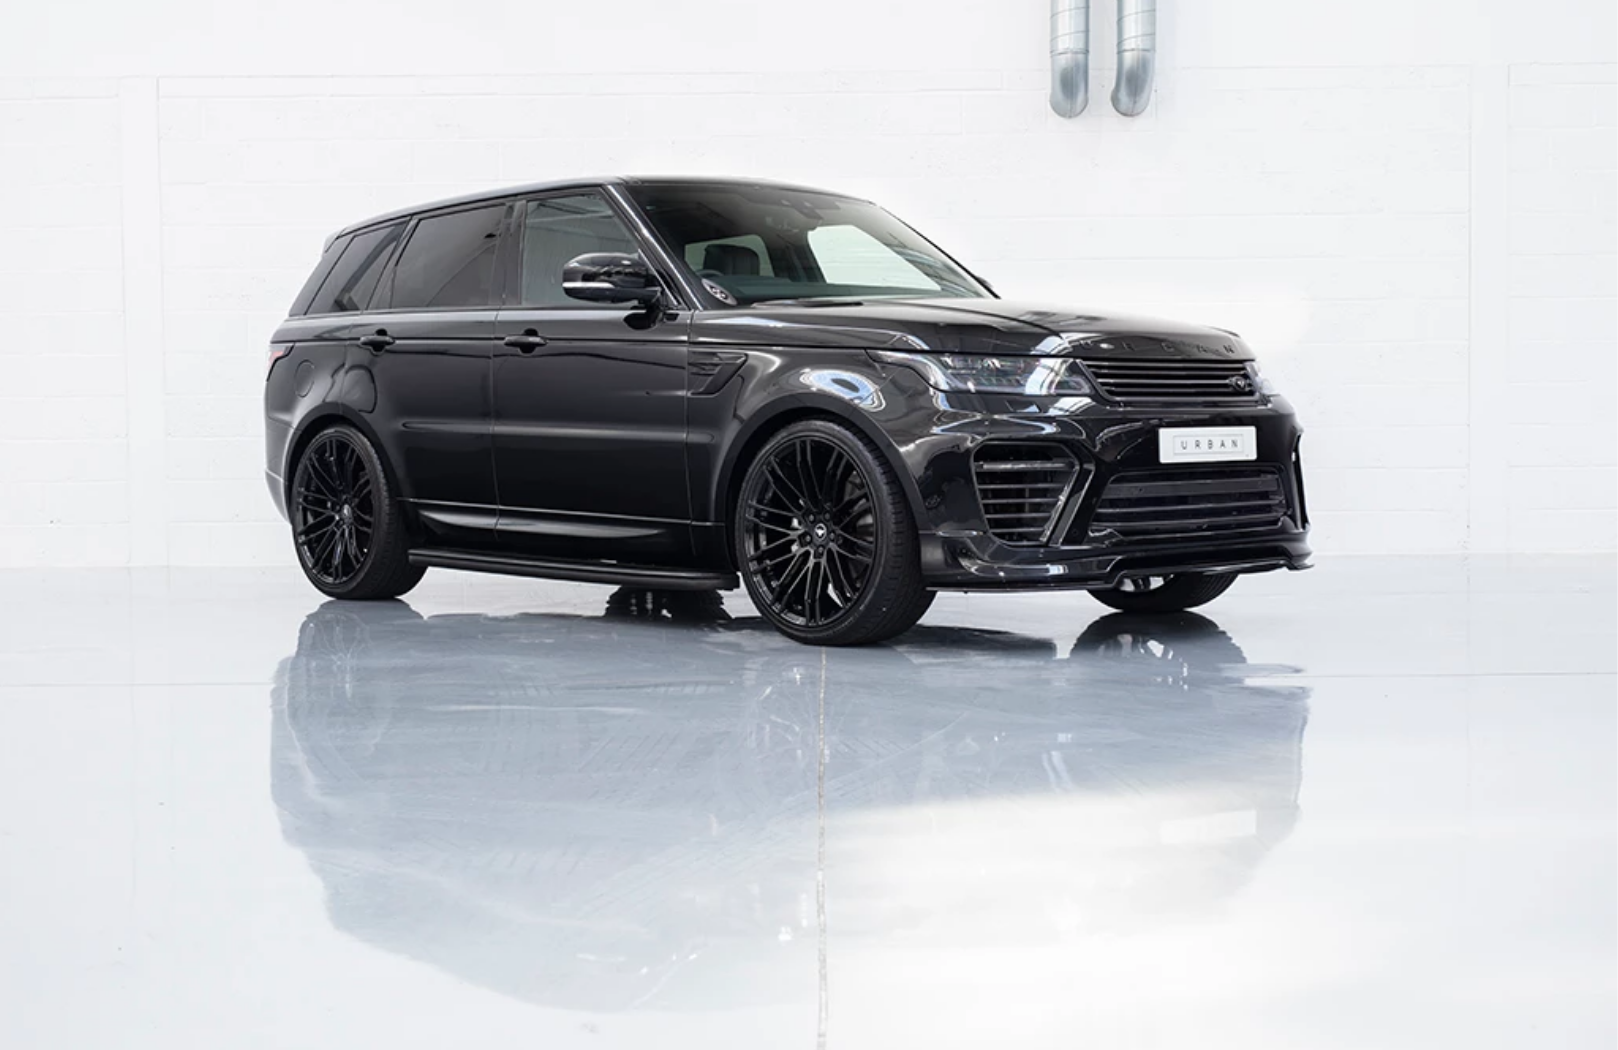 Urban Body Kit For Land Rover Range Rover Sport 2 Buy With Delivery Installation Affordable